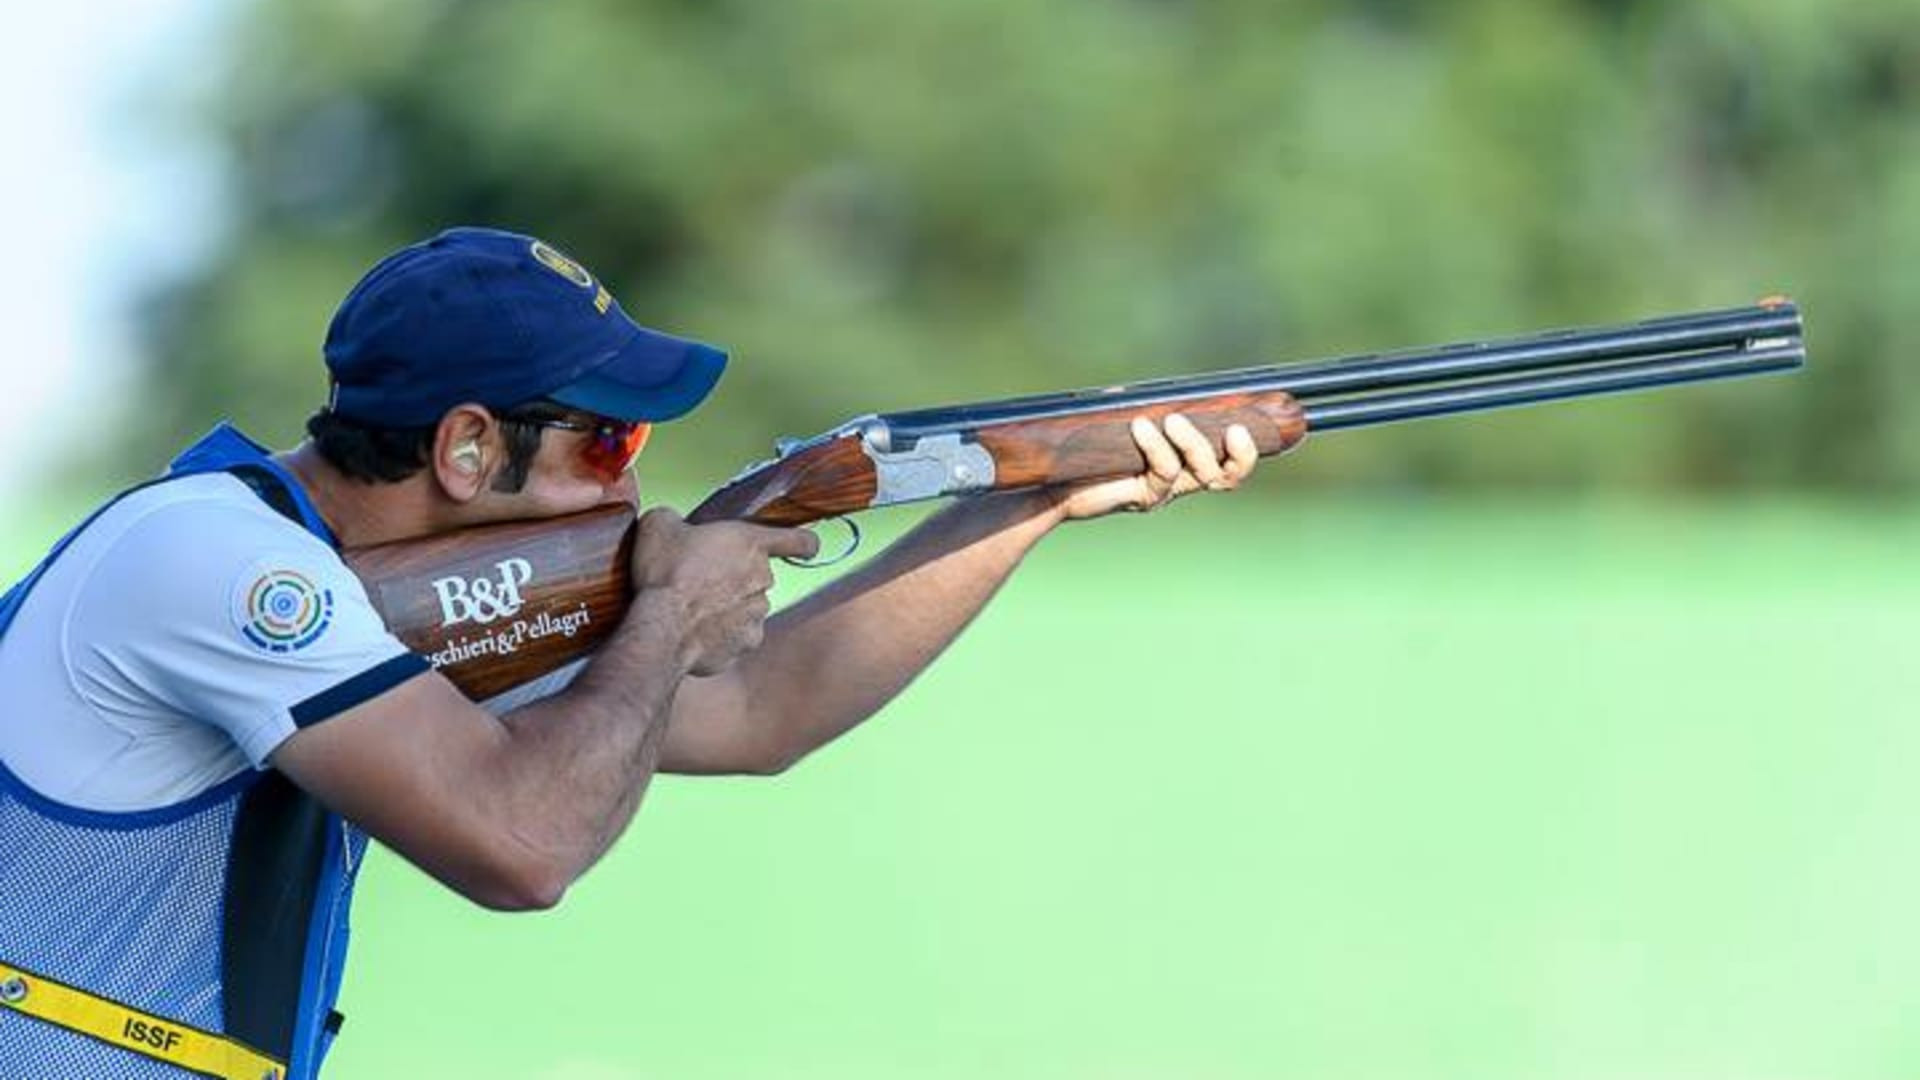 ISSF President Vladimir Lisin has controversially proposed a number of rule changes to be tested at the ISSF Shotgun World Cup in Baku ©Getty Images